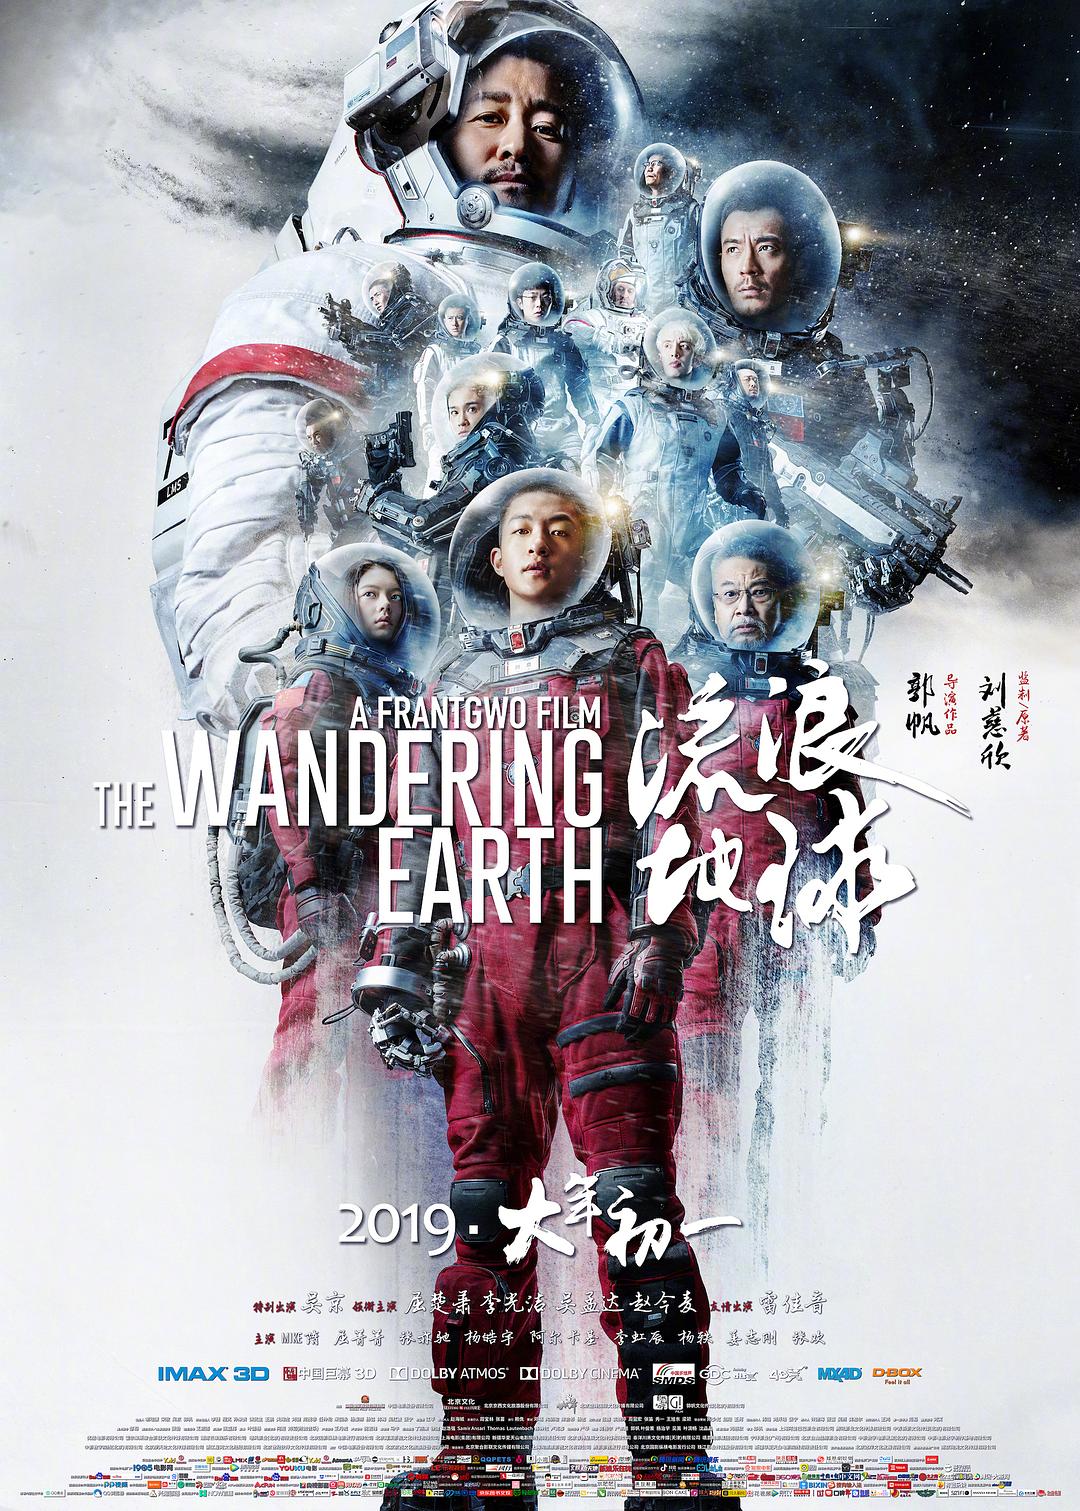 ˵ The.Wandering.Earth.2019.CHINESE.1080p.BluRay.x264.DTS-HD.MA.7.1-FGT 13.93G-1.png